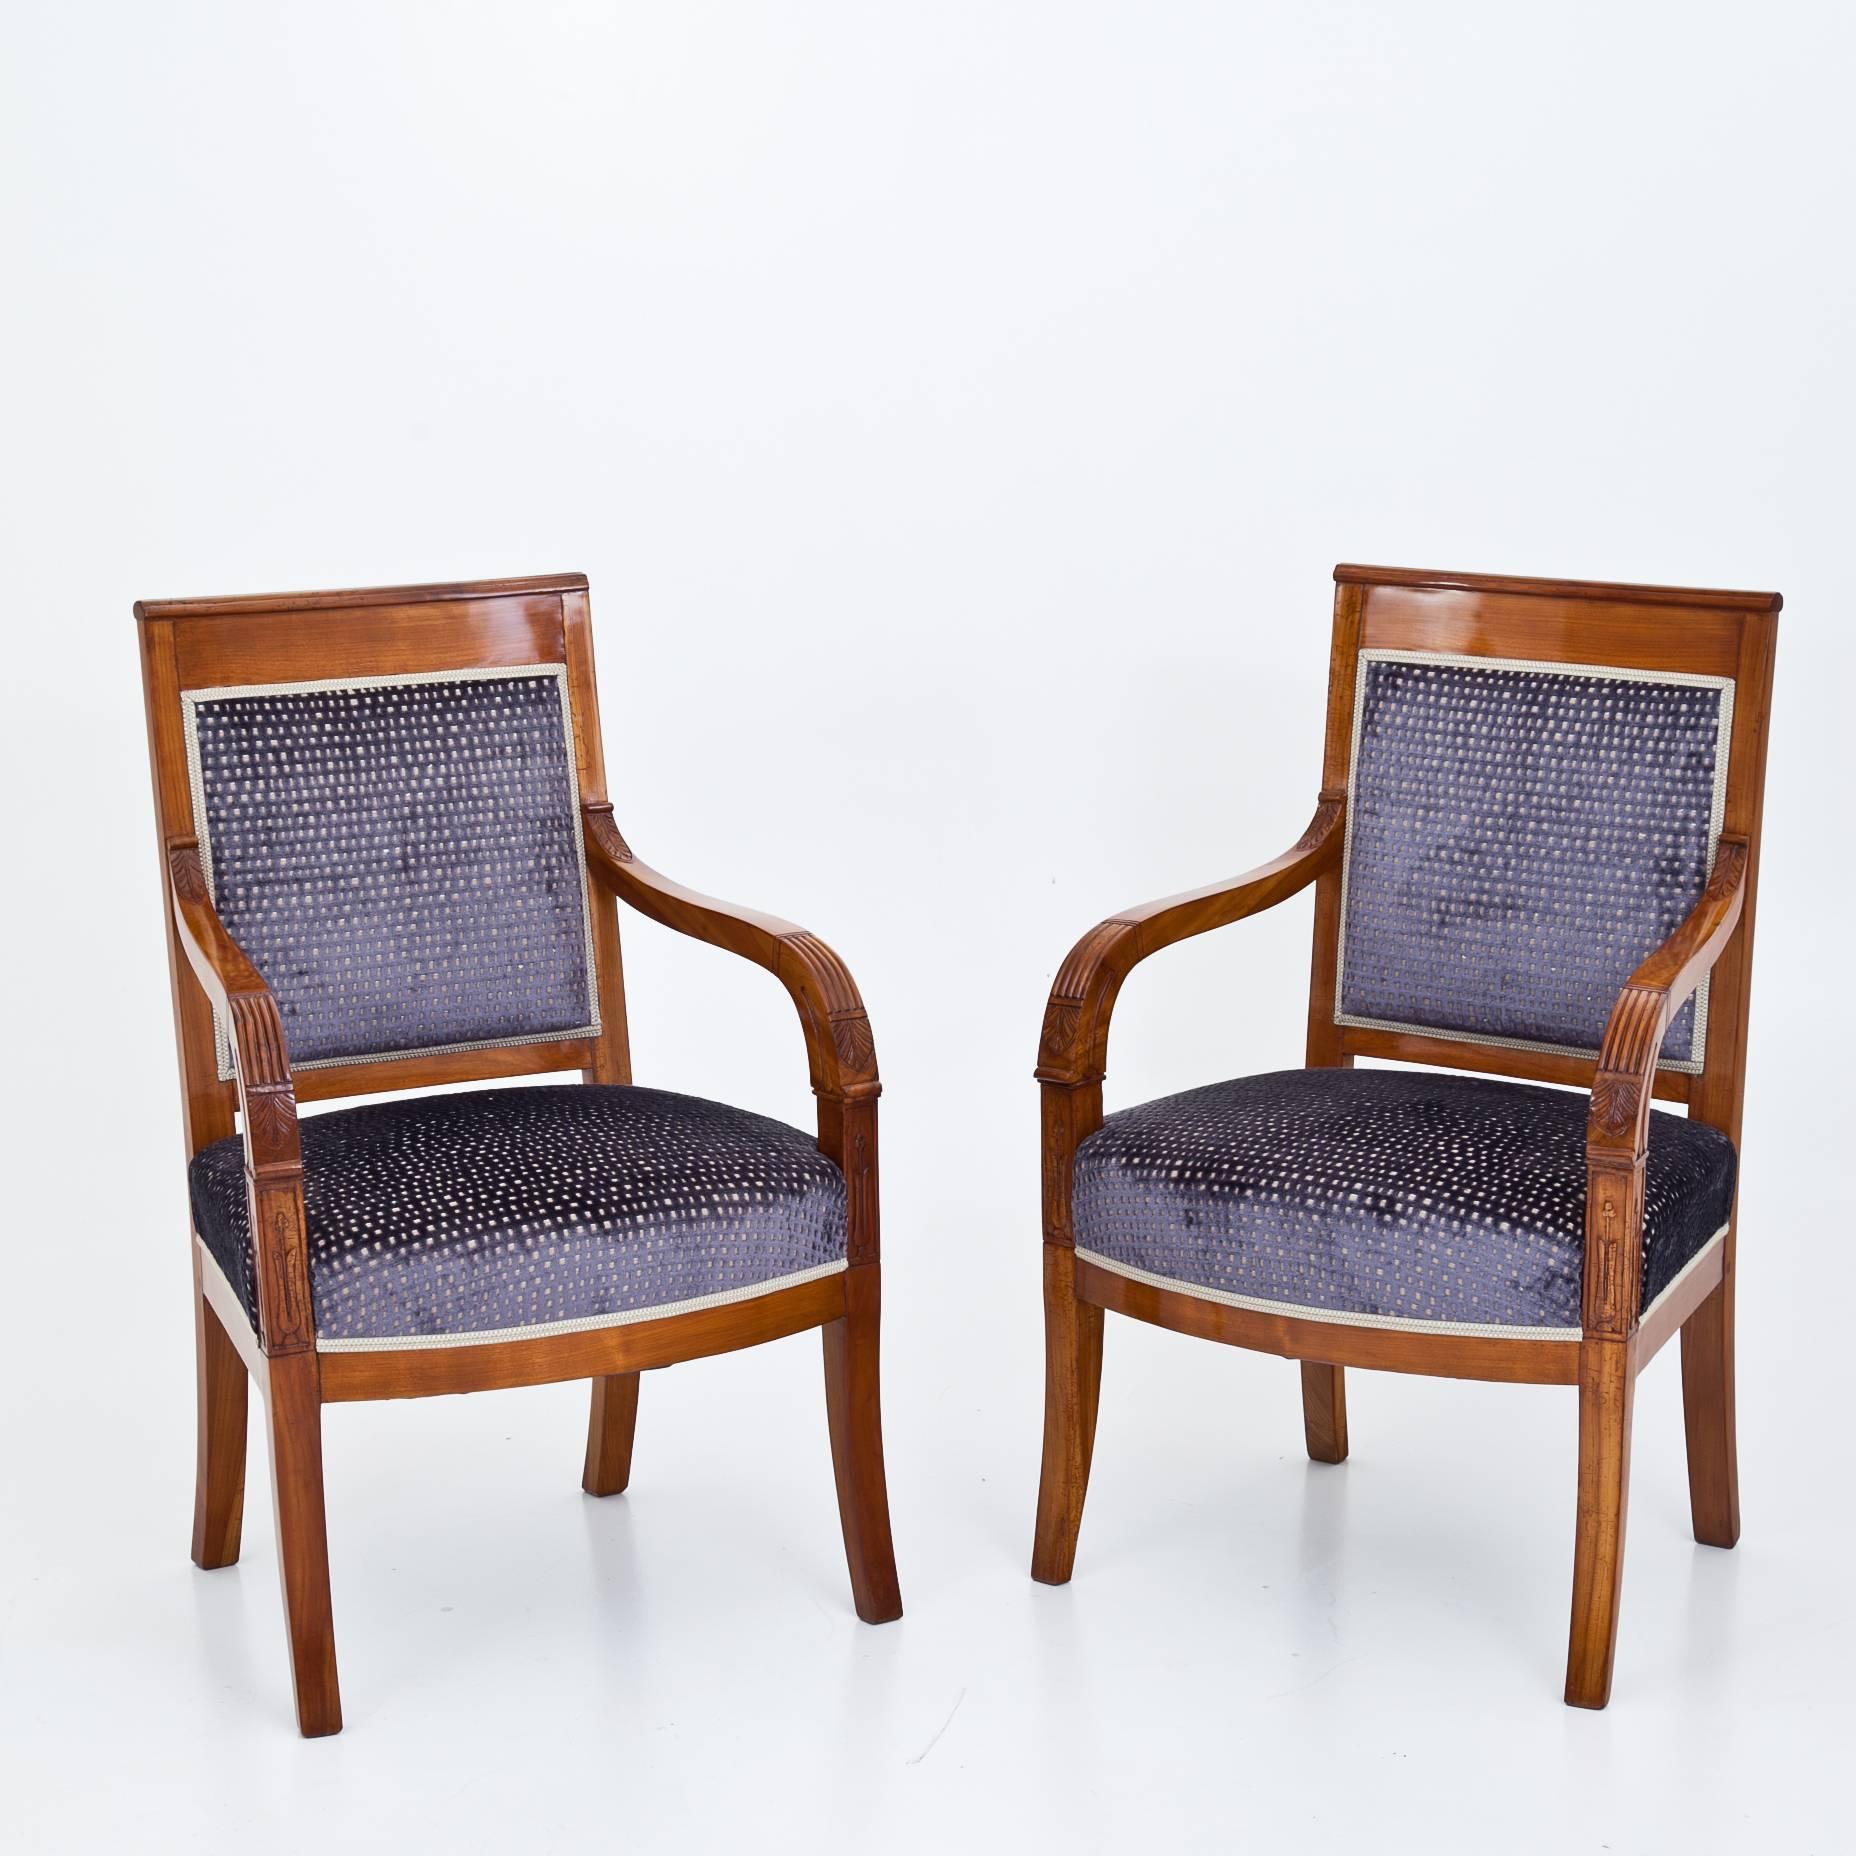 Pair of French cherrywood armchairs of the first half of the 19th century. The backrests and seats are reupholstered with a high quality purple and gold fabric, and the armrests show exquisite carvings. The chairs are very elegant and in a very good